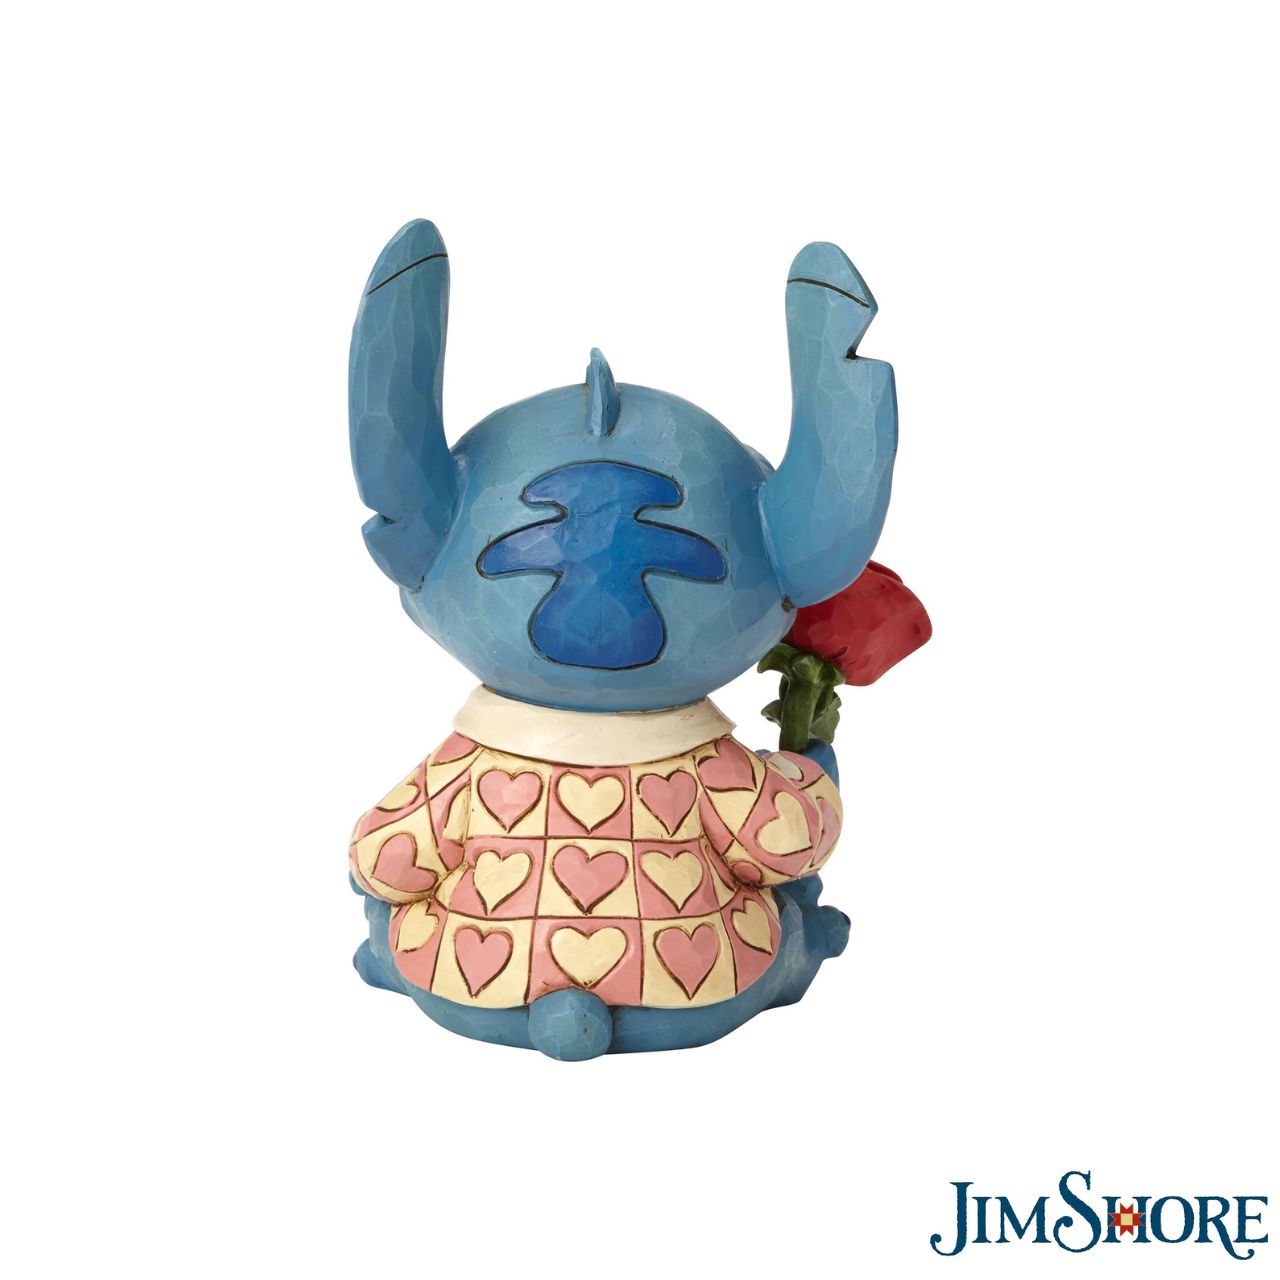 Jim Shore Clueless Casanova Stitch Figurine  Stitch has transformed into a model citizen that Lilo would be proud of! Designed by Jim Shore, the adorable alien wears a heart-patterned shirt as he offers a single red rose. Stitch makes a great gift for your Ohana.